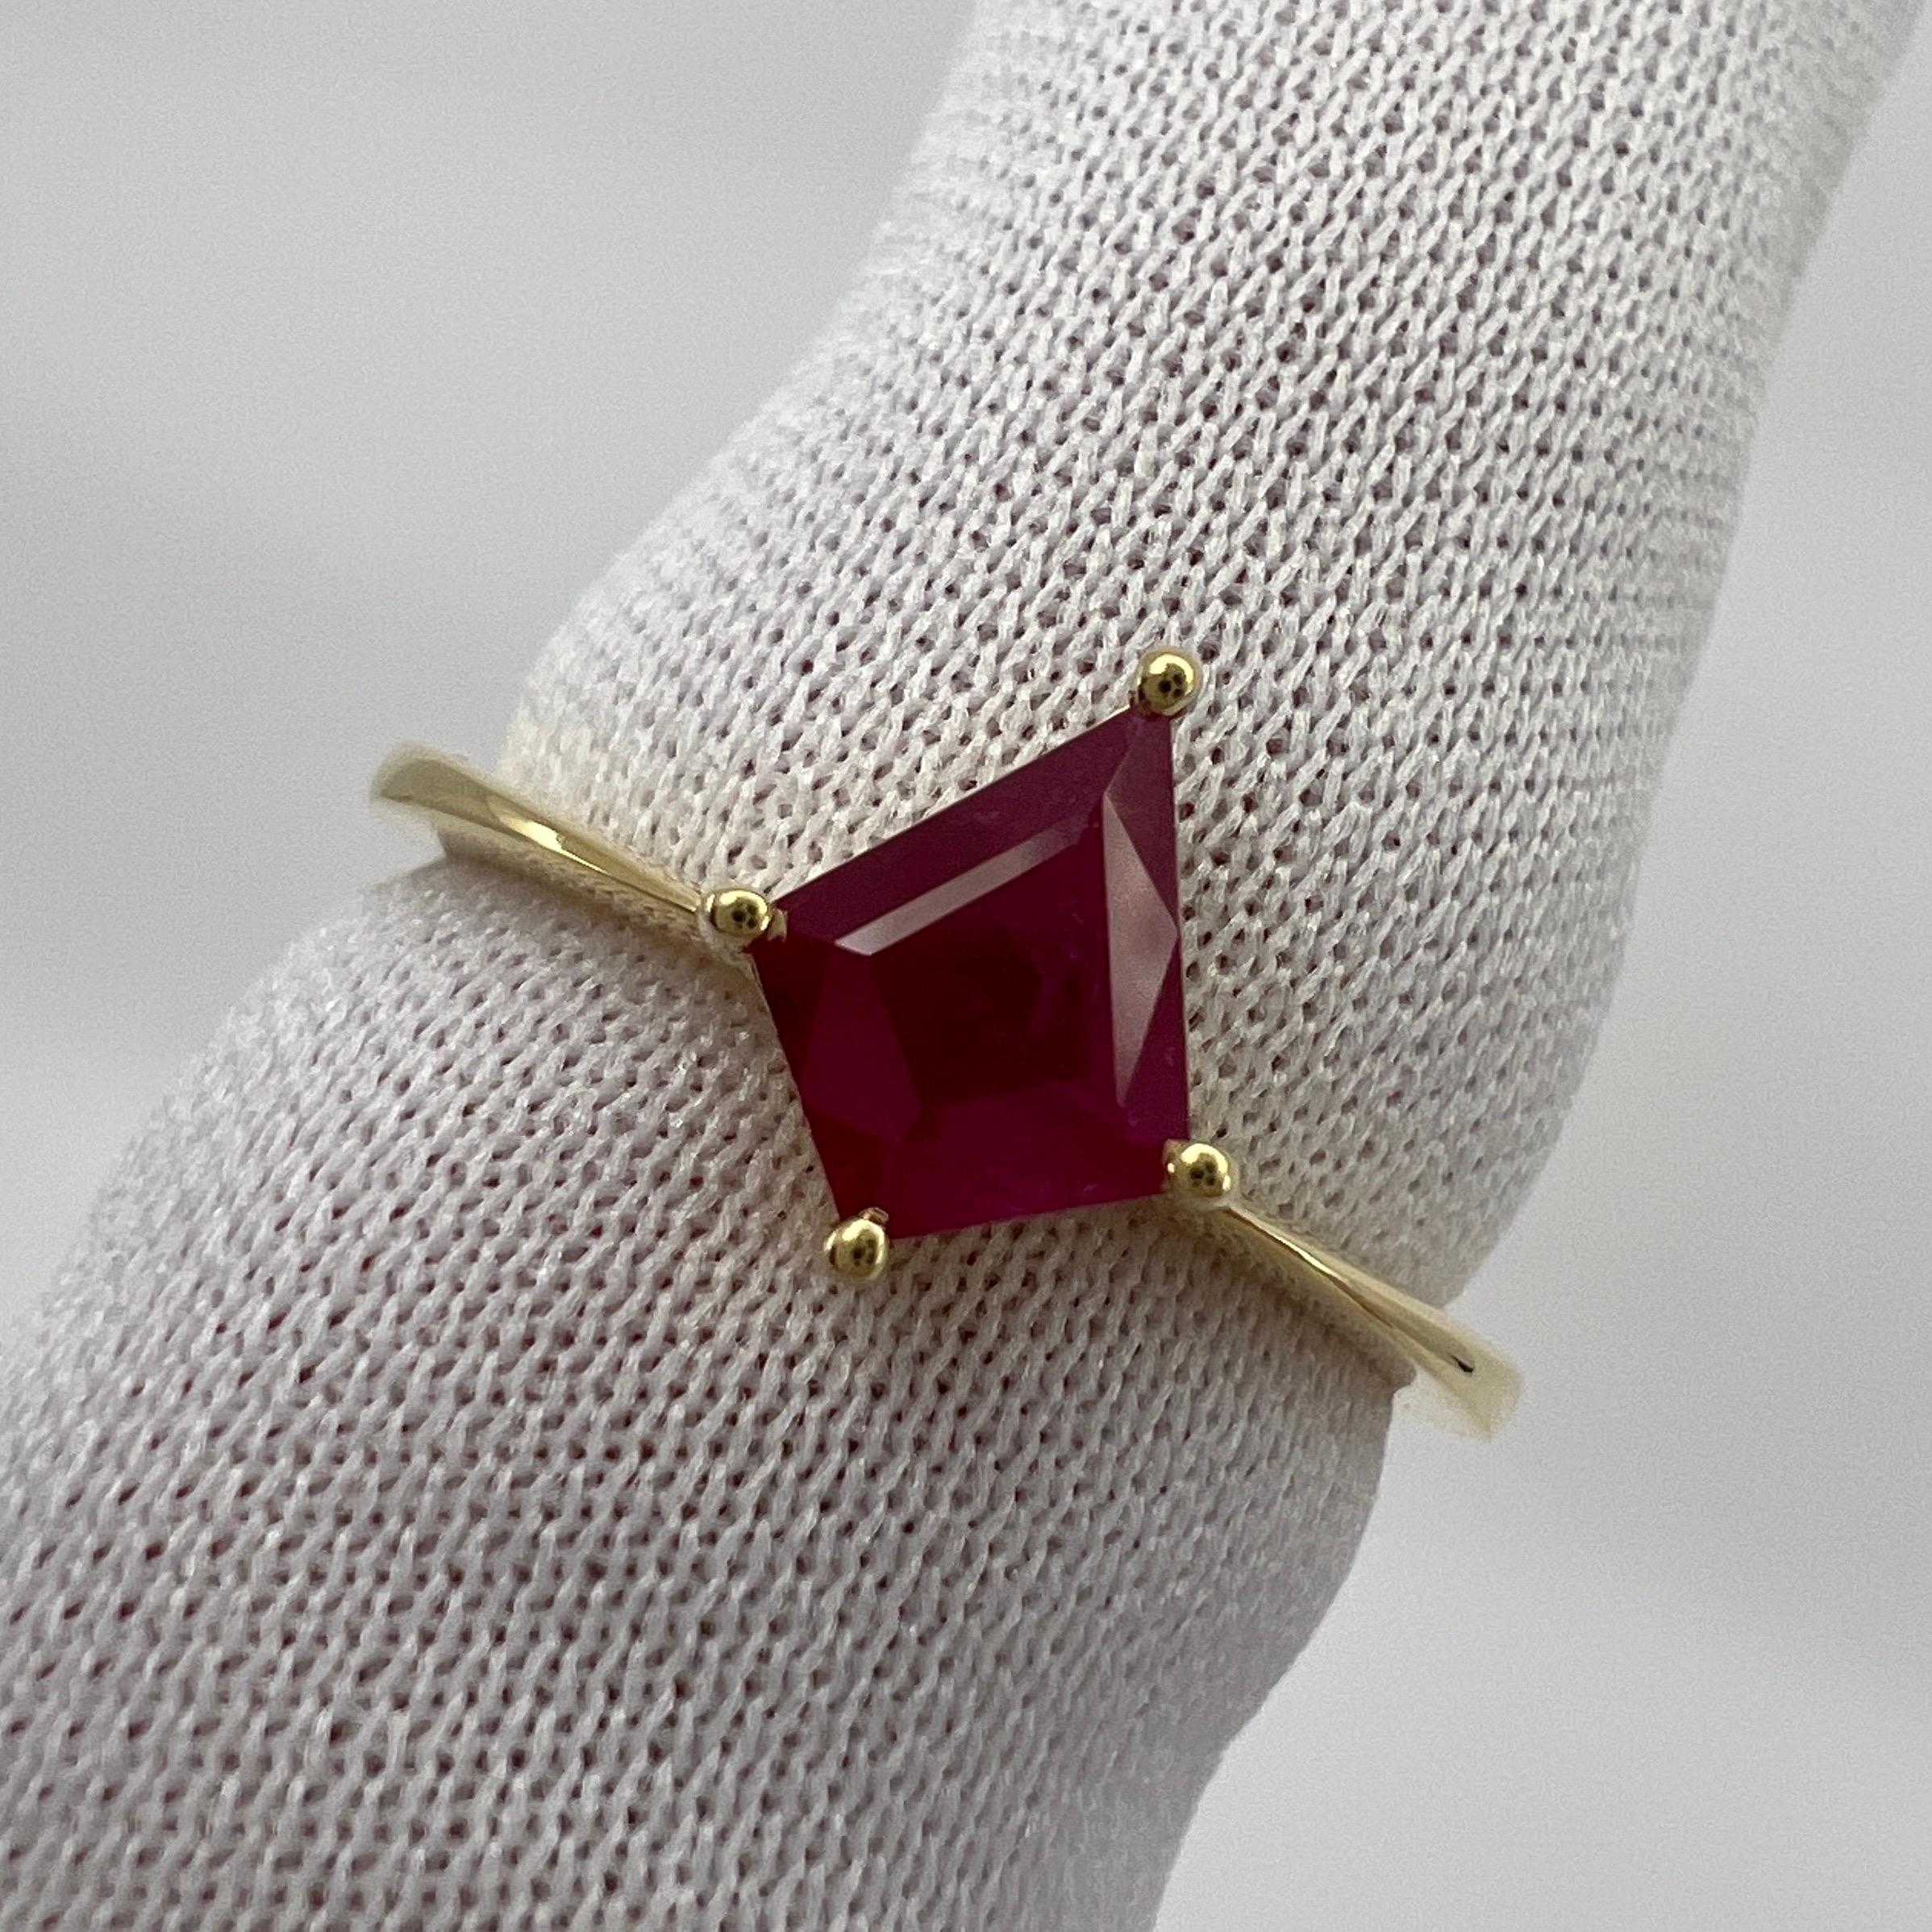 0.73 Carat Pinkish Red Ruby Fancy Kite Cut 18k Yellow Gold Modern Solitaire Ring For Sale 3